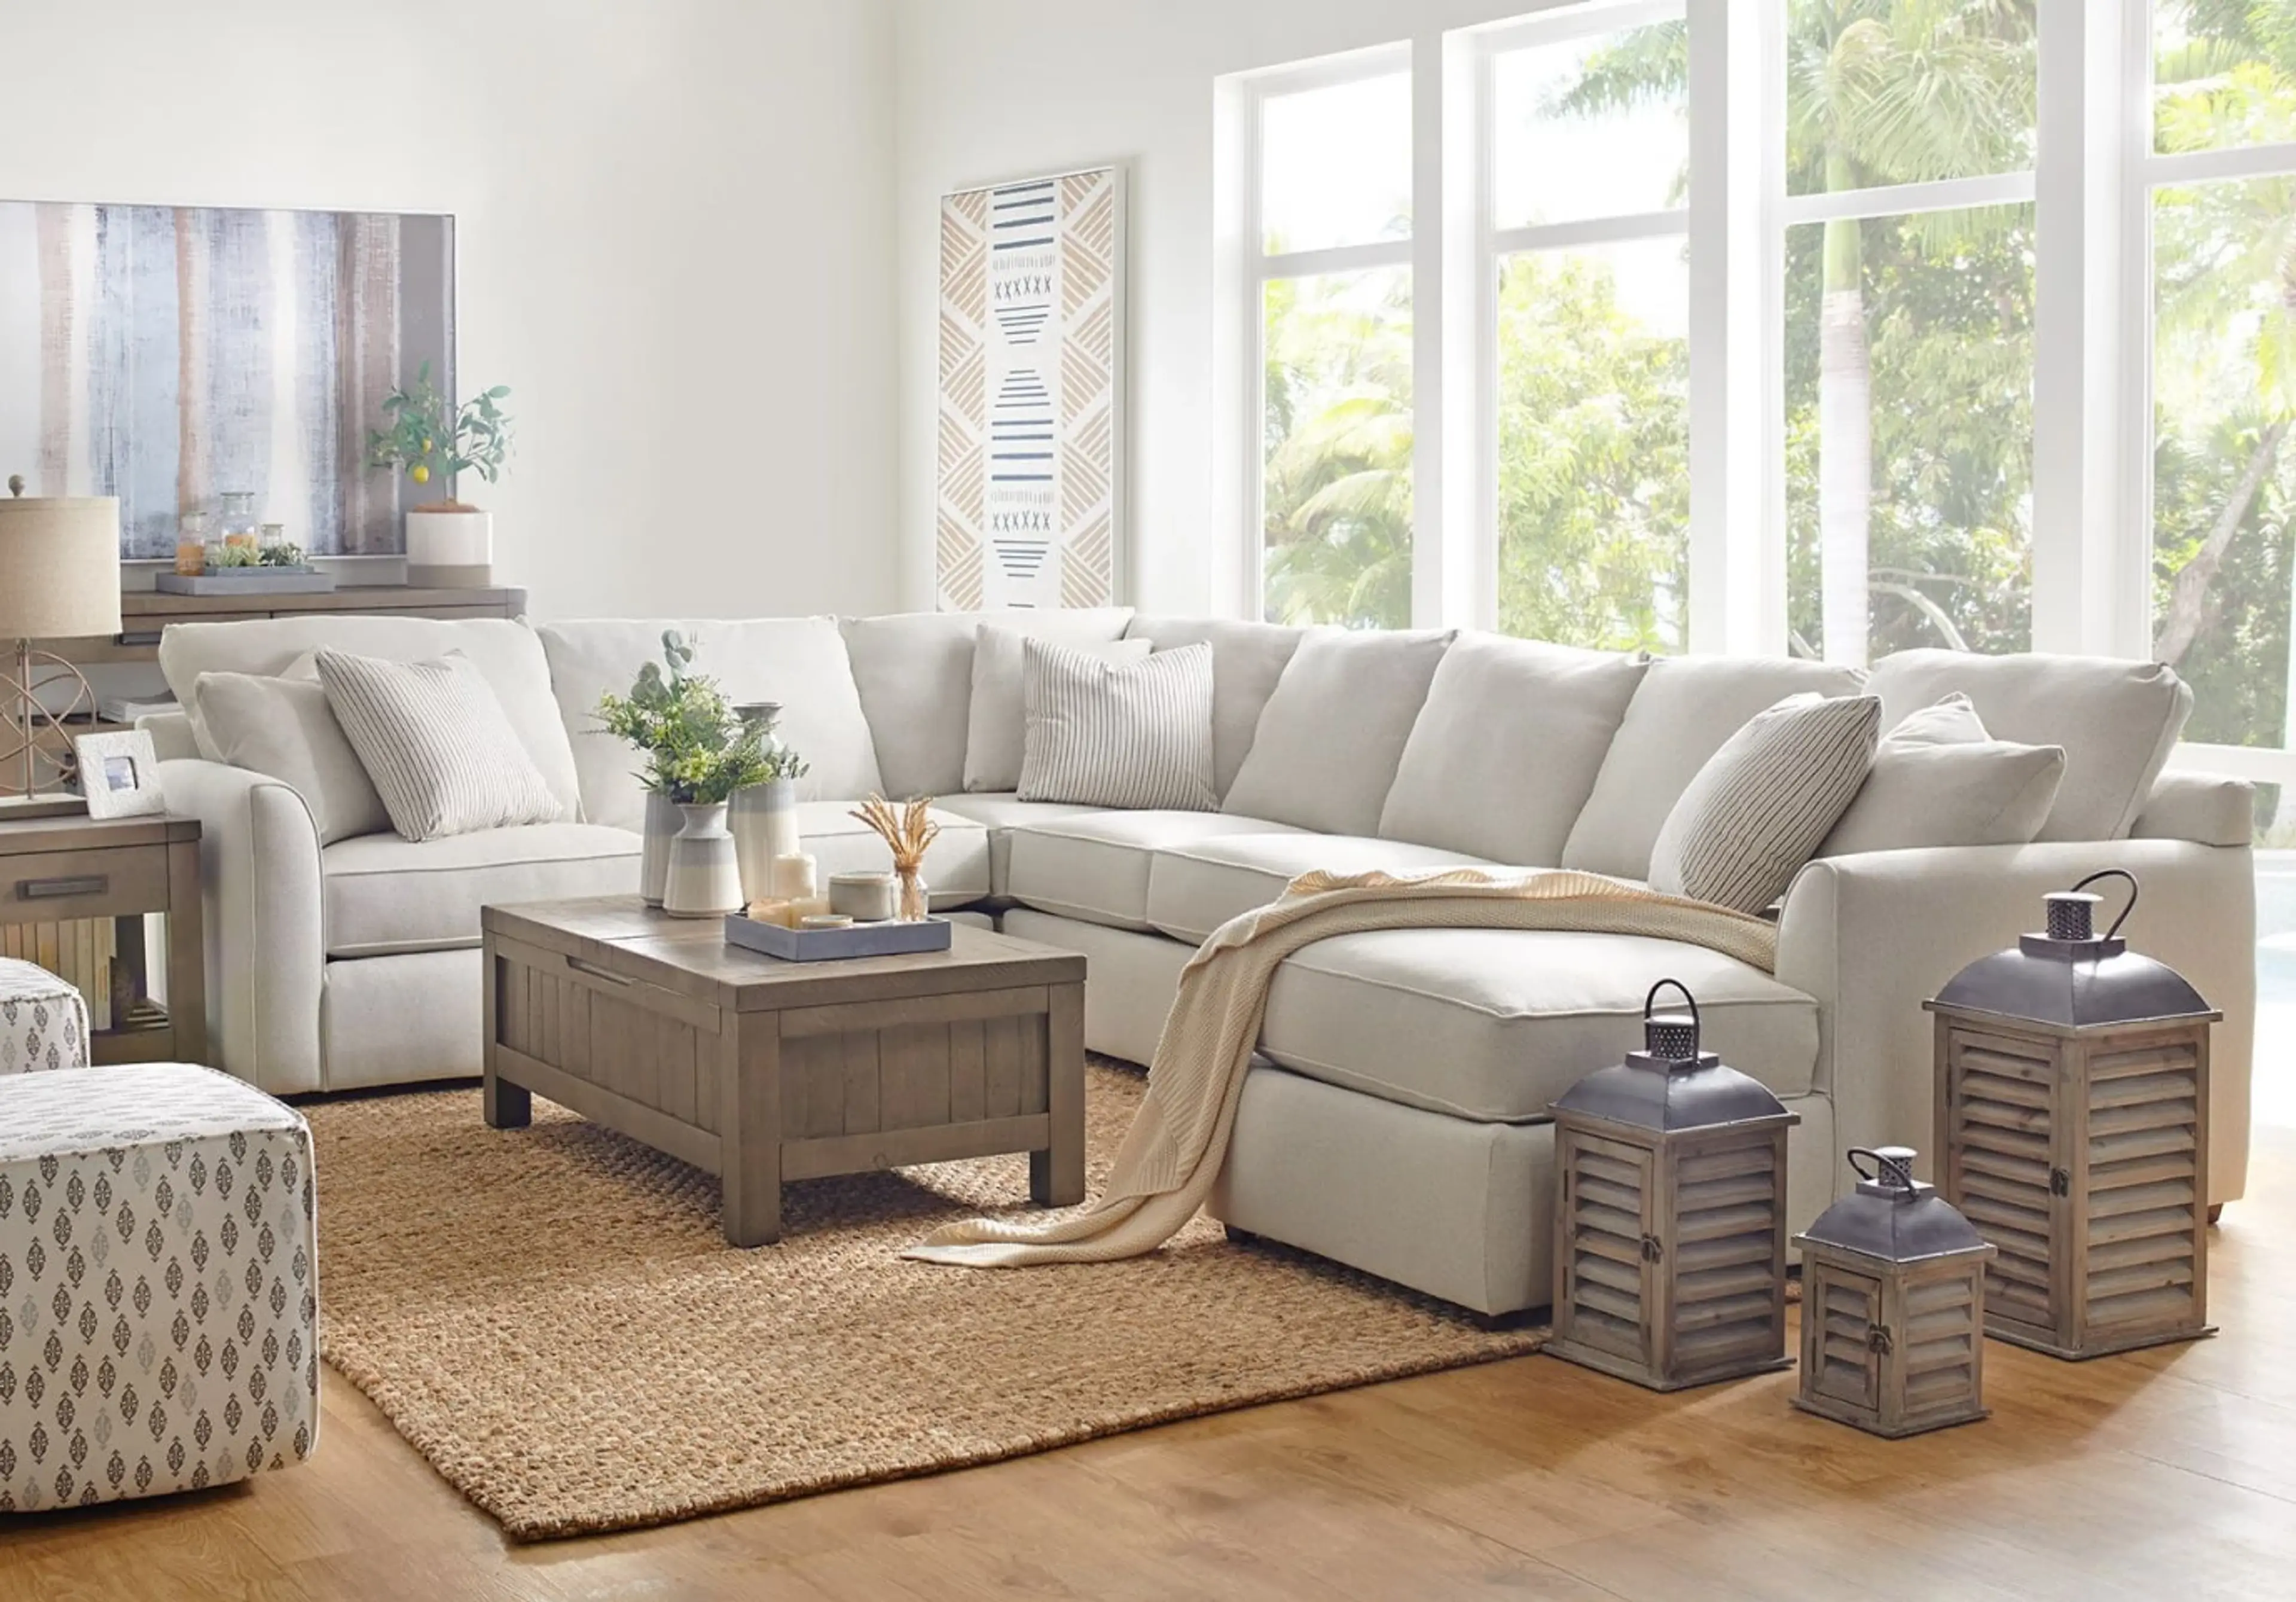 Shop for a Sectional